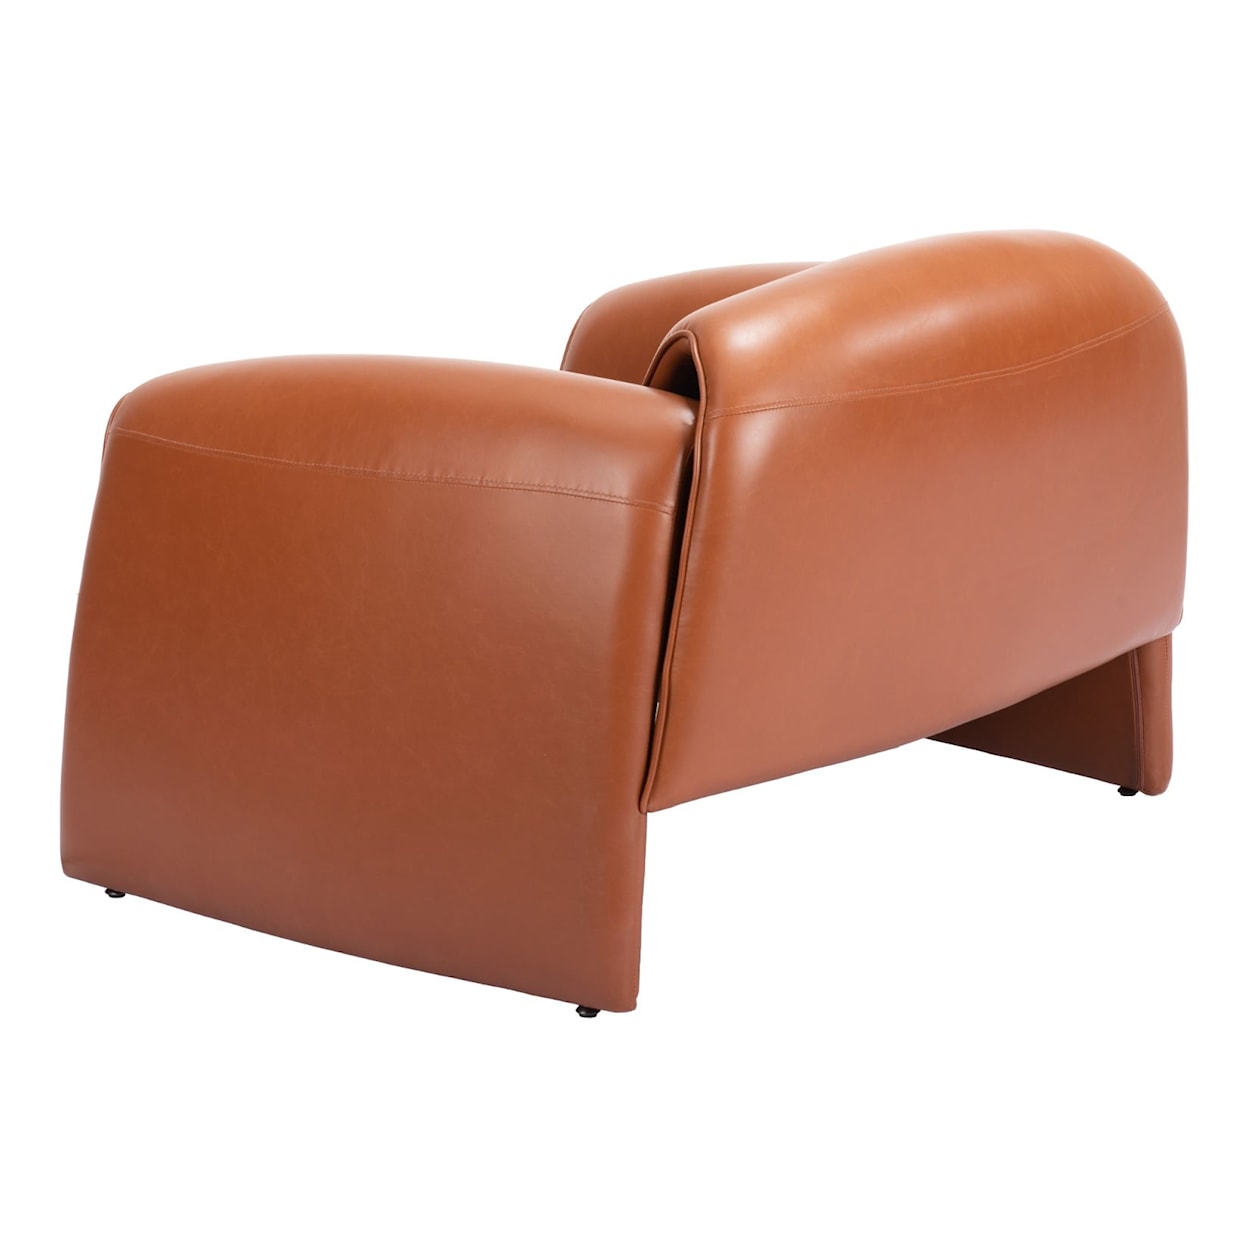 Zuo Horten Collection Accent Chair